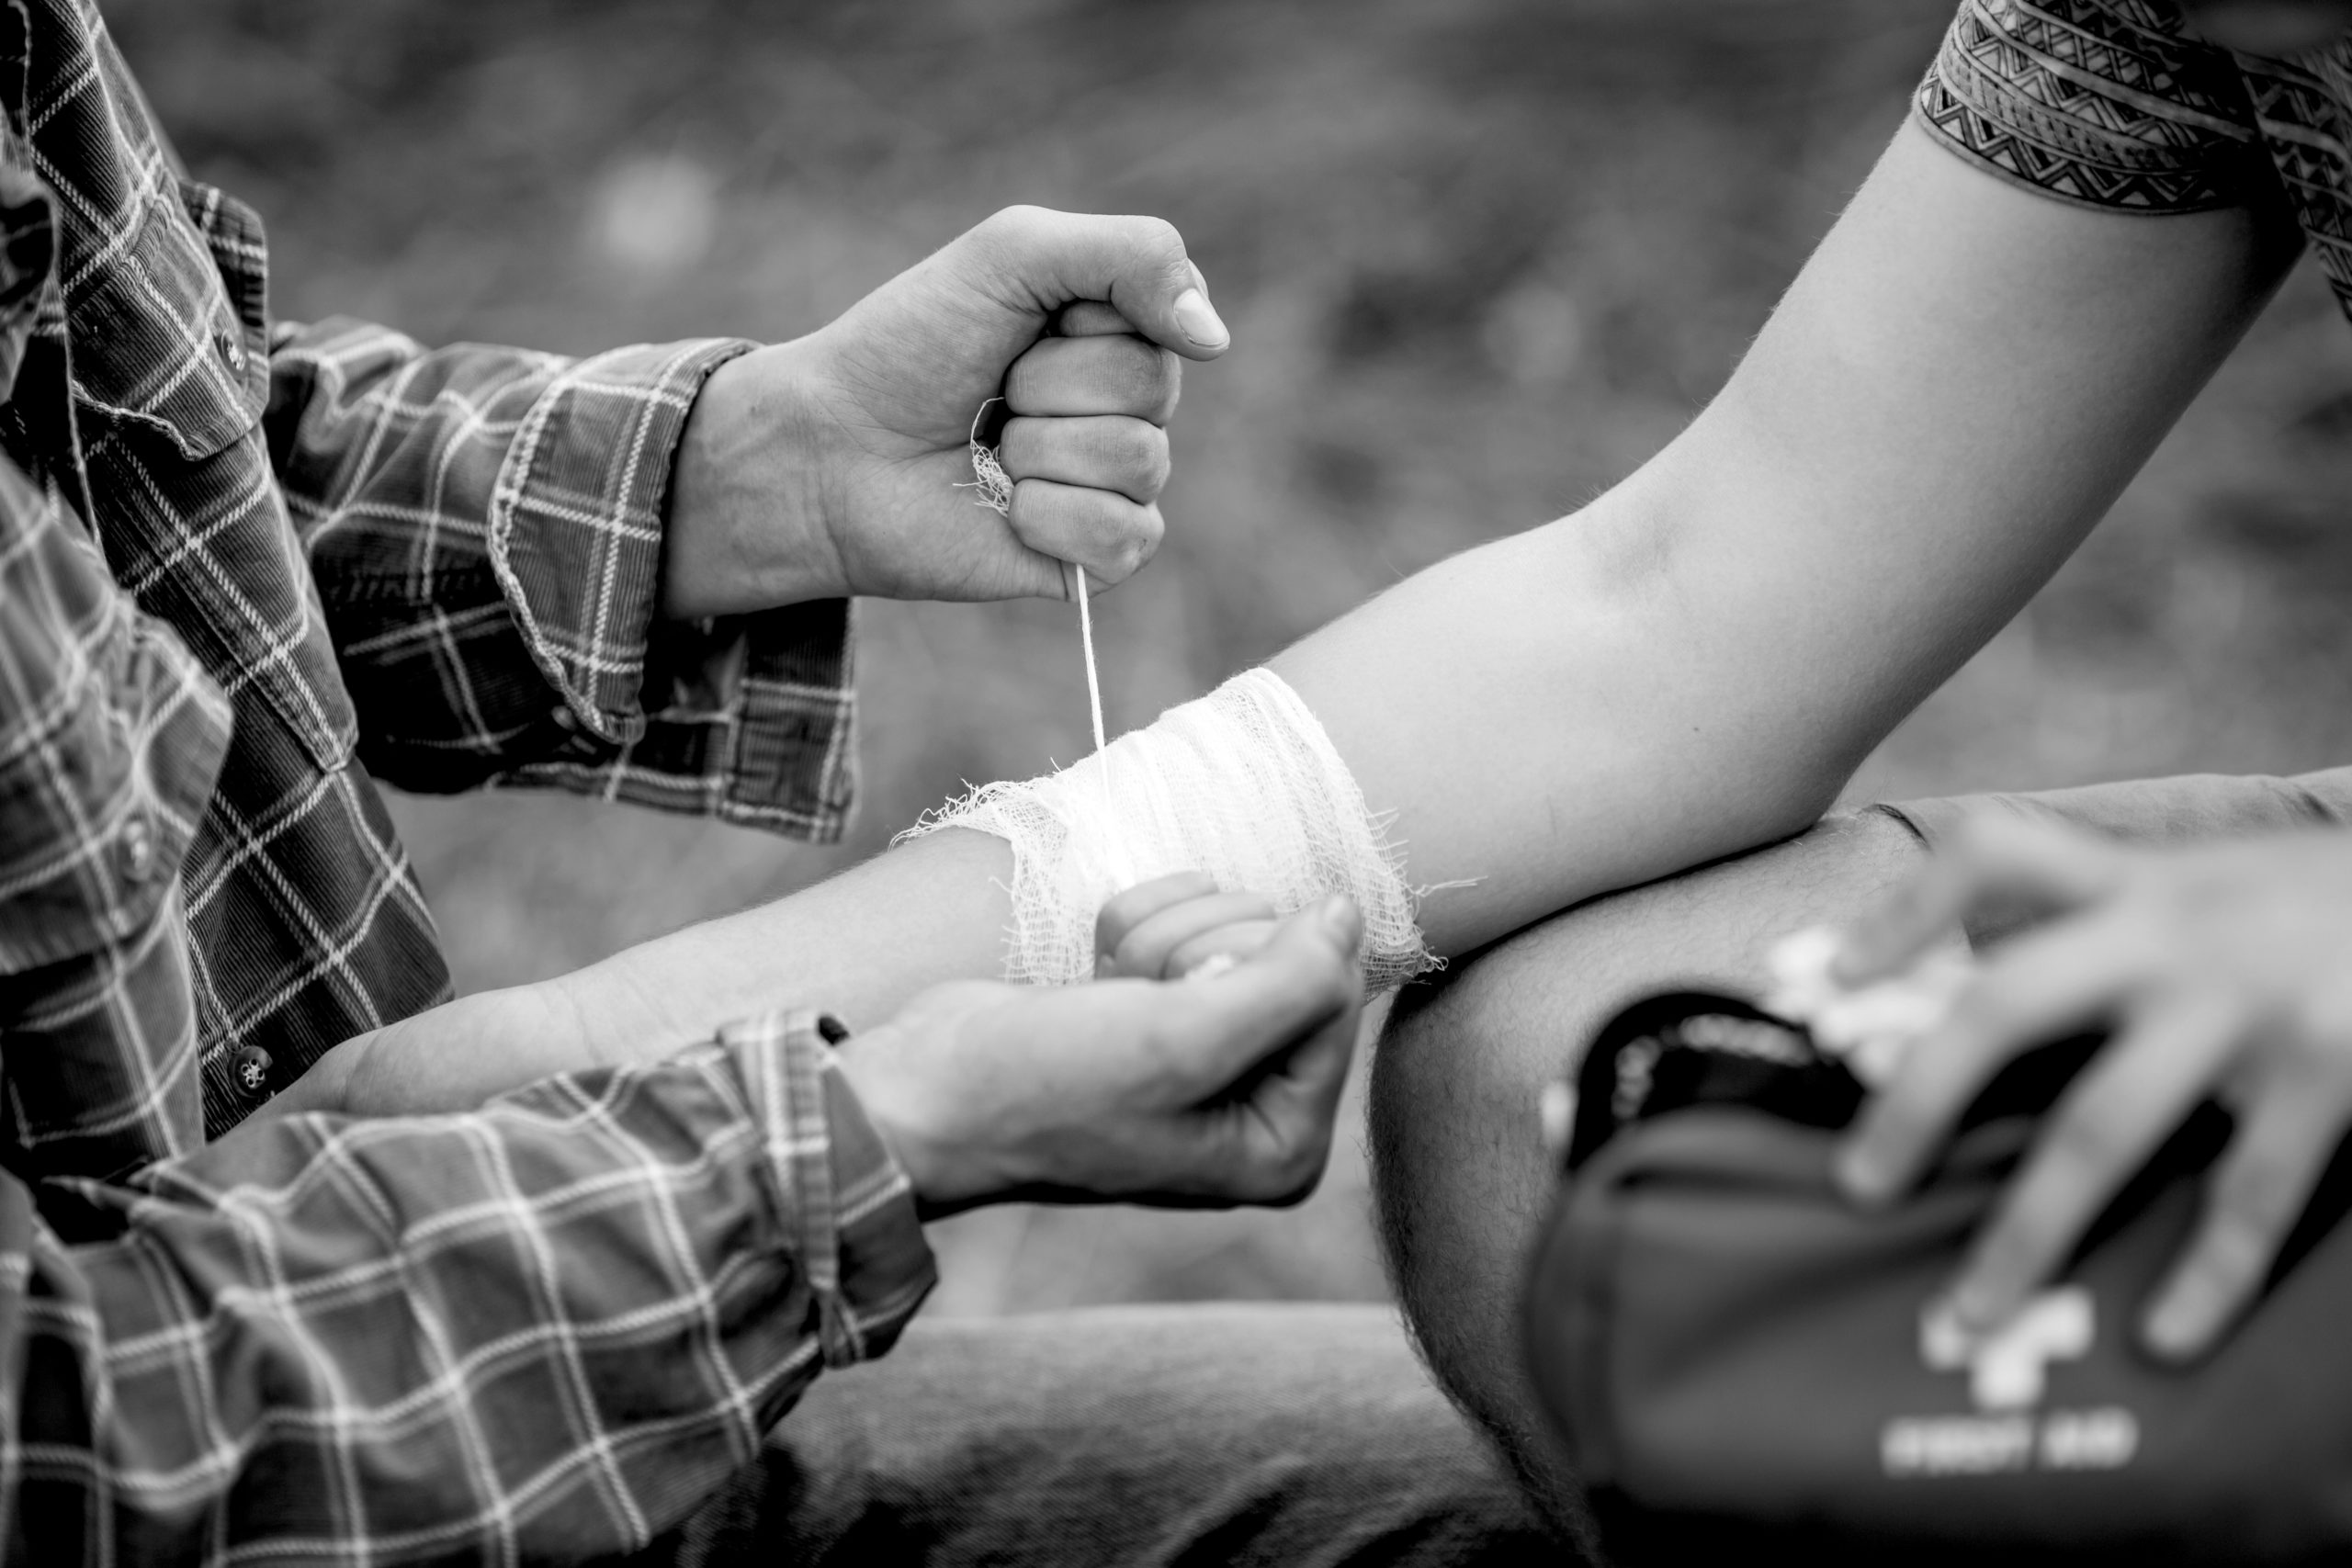 A person wrapping his friends injured arm in gauze